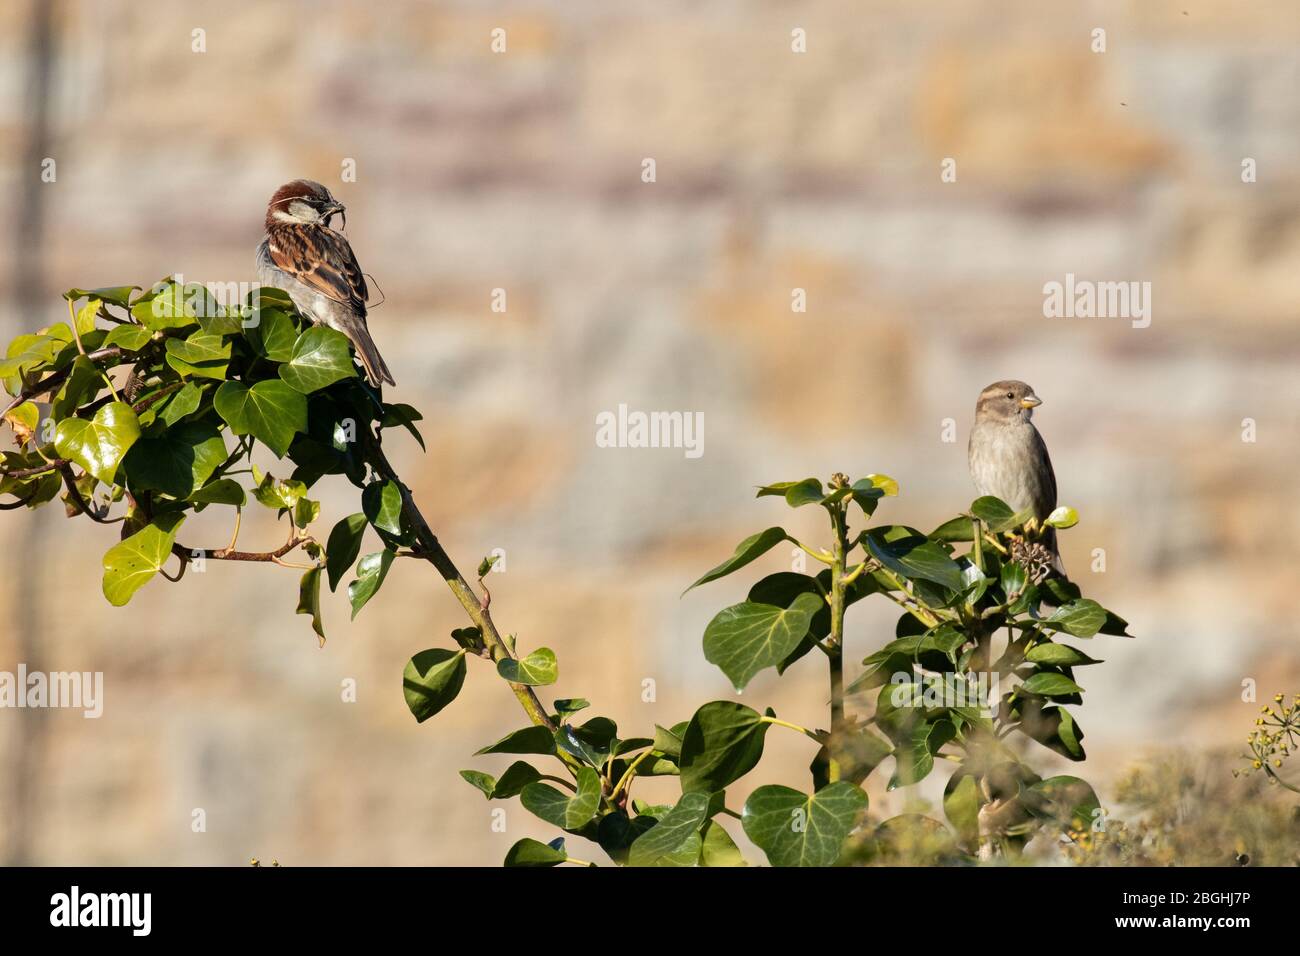 A pair of house sparrows perched in a tree looking for nesting sites Stock Photo